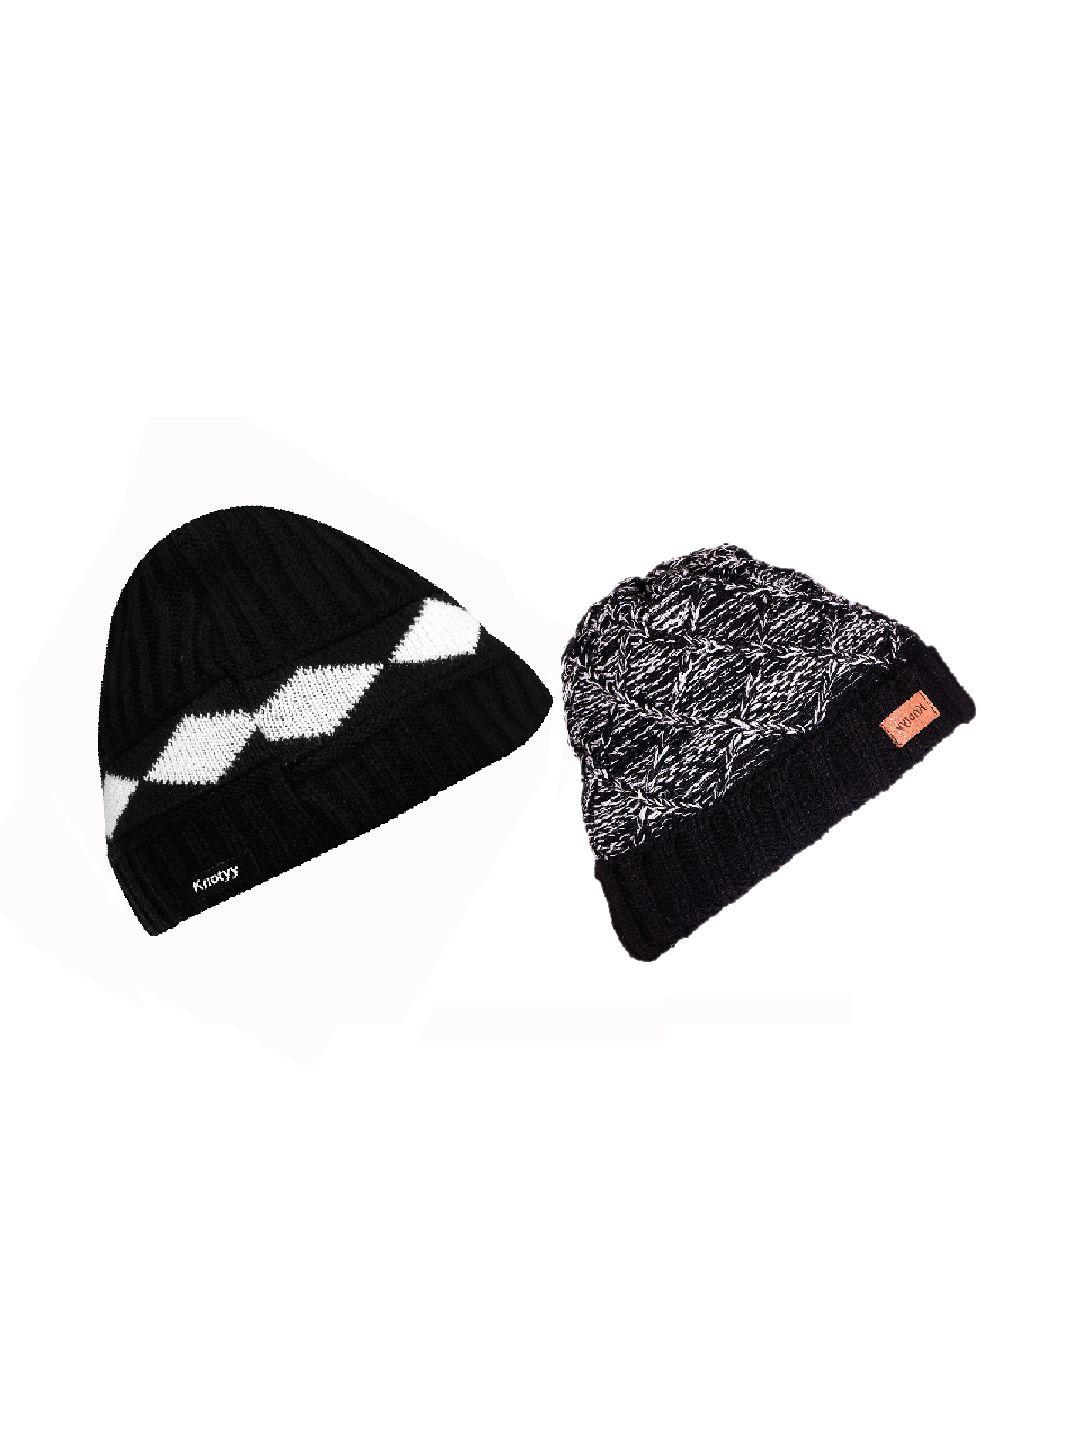 knotyy-men-pack-of-2-beanies